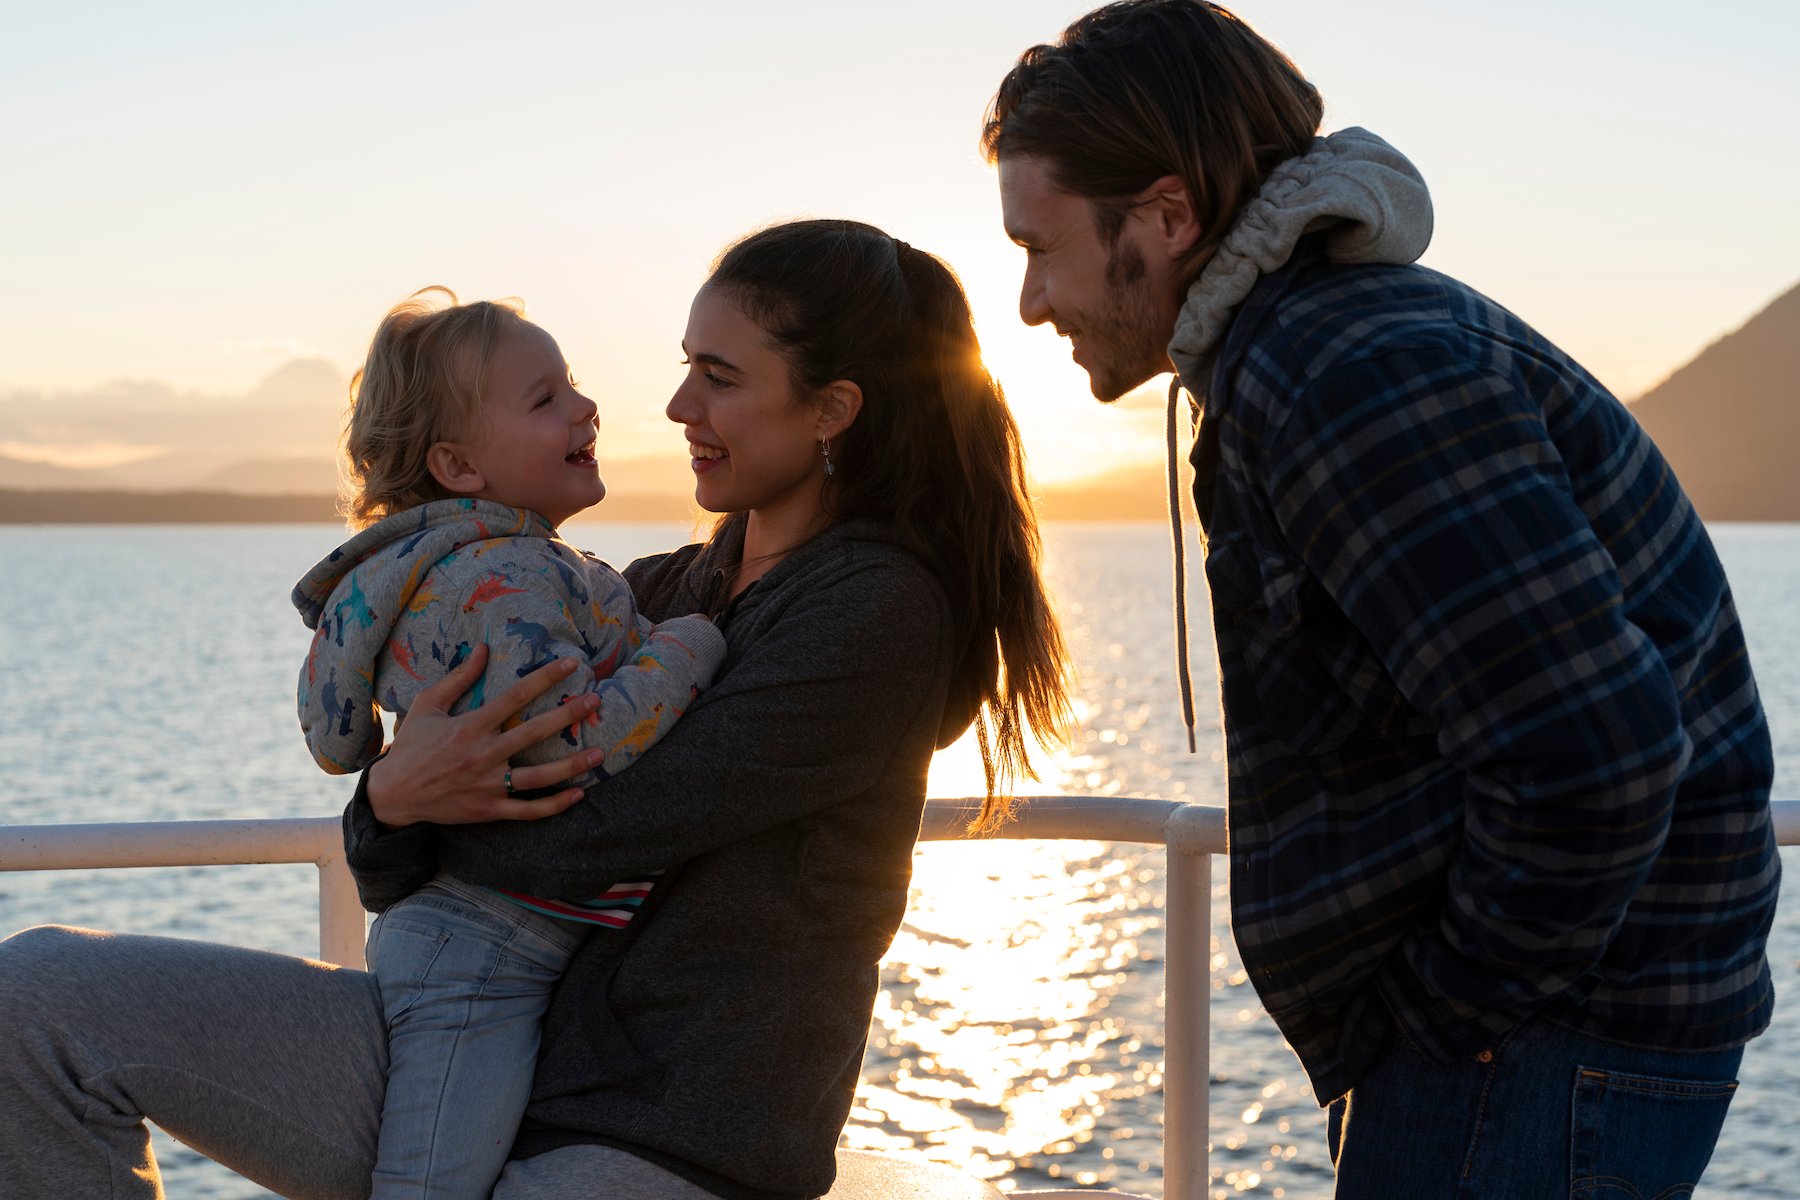 Maddy, Alex, and Sean together on a boat smiling in the Netflix series 'Maid' Season 1. Fans want to know if the cast will return for 'Maid' Season 2